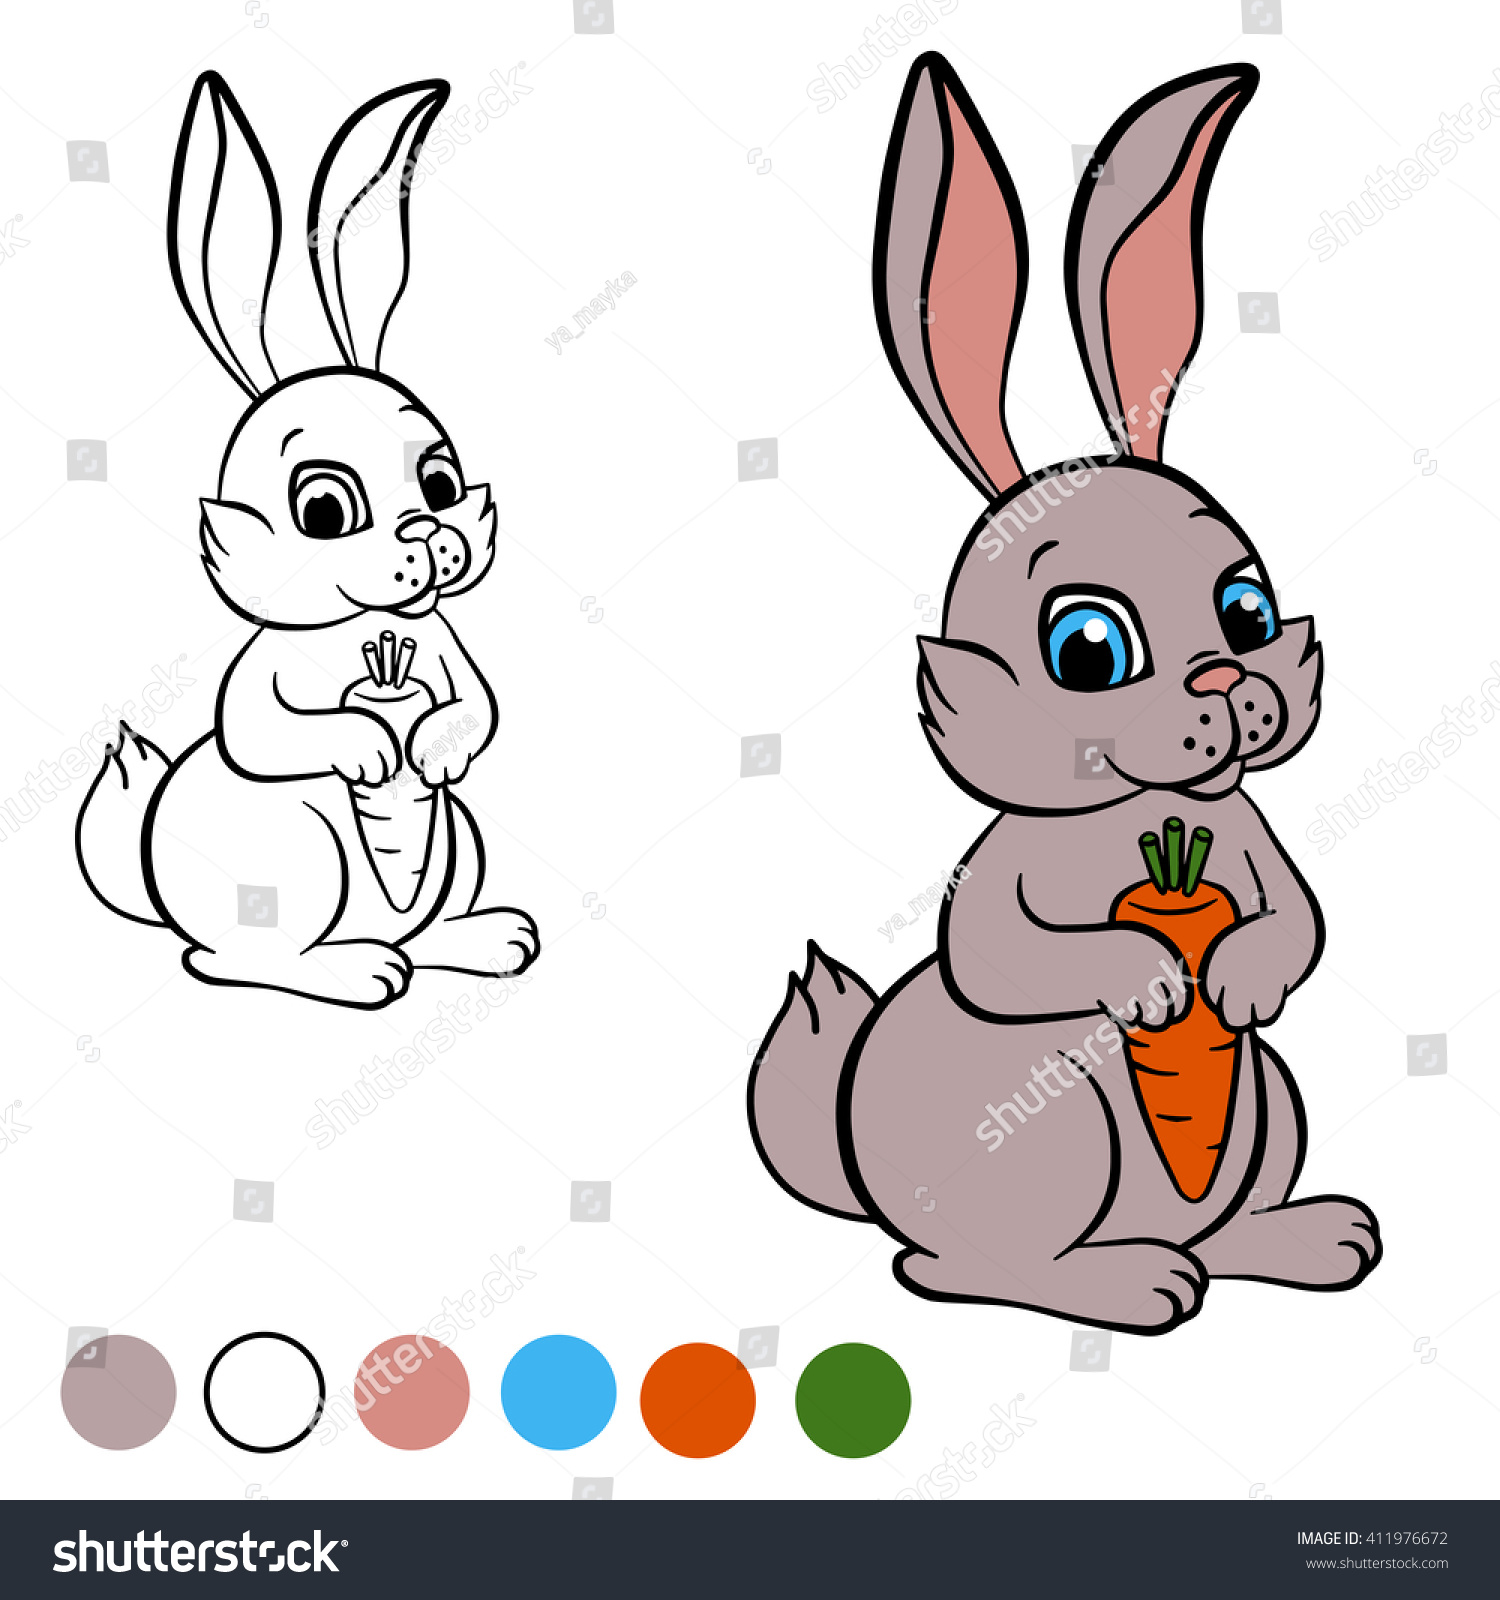 Coloring Page. Little Cute Hare Holds A Carrot In The Hands And Smiles